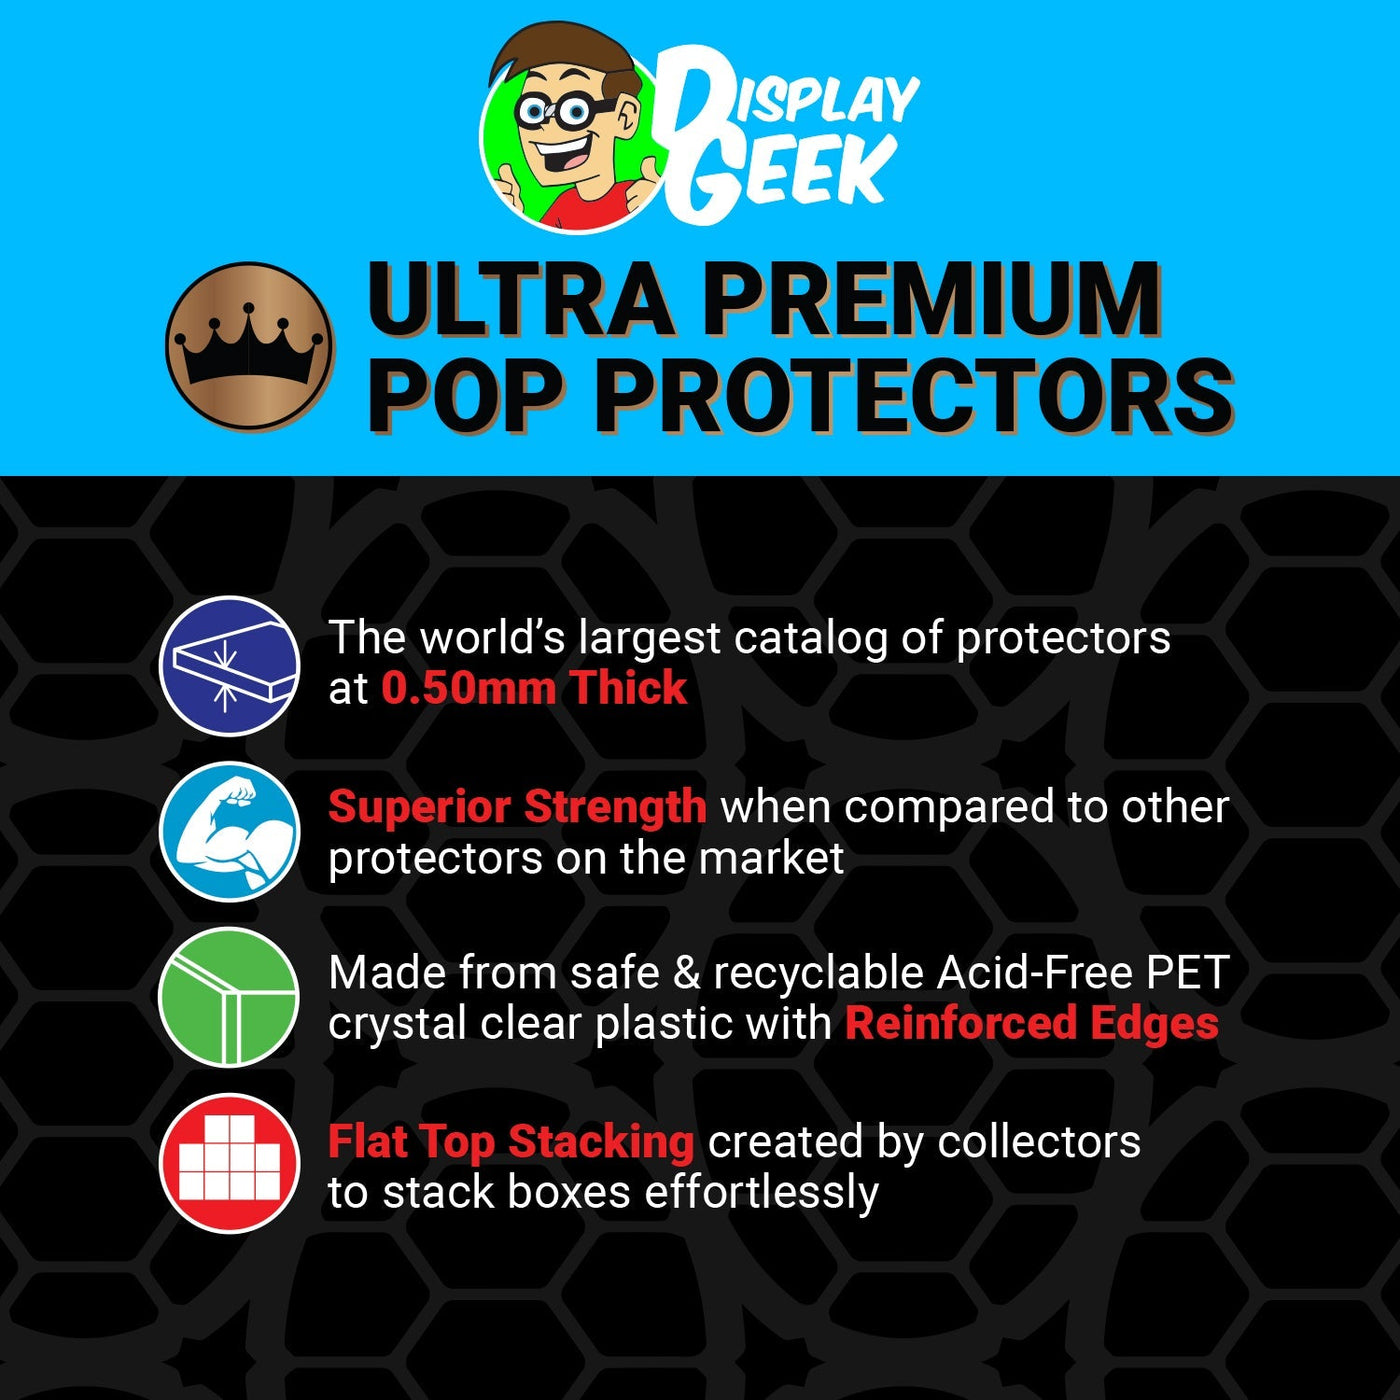 Pop Protector for Colonel Sanders Funko Pop Pez on The Protector Guide App by Display Geek